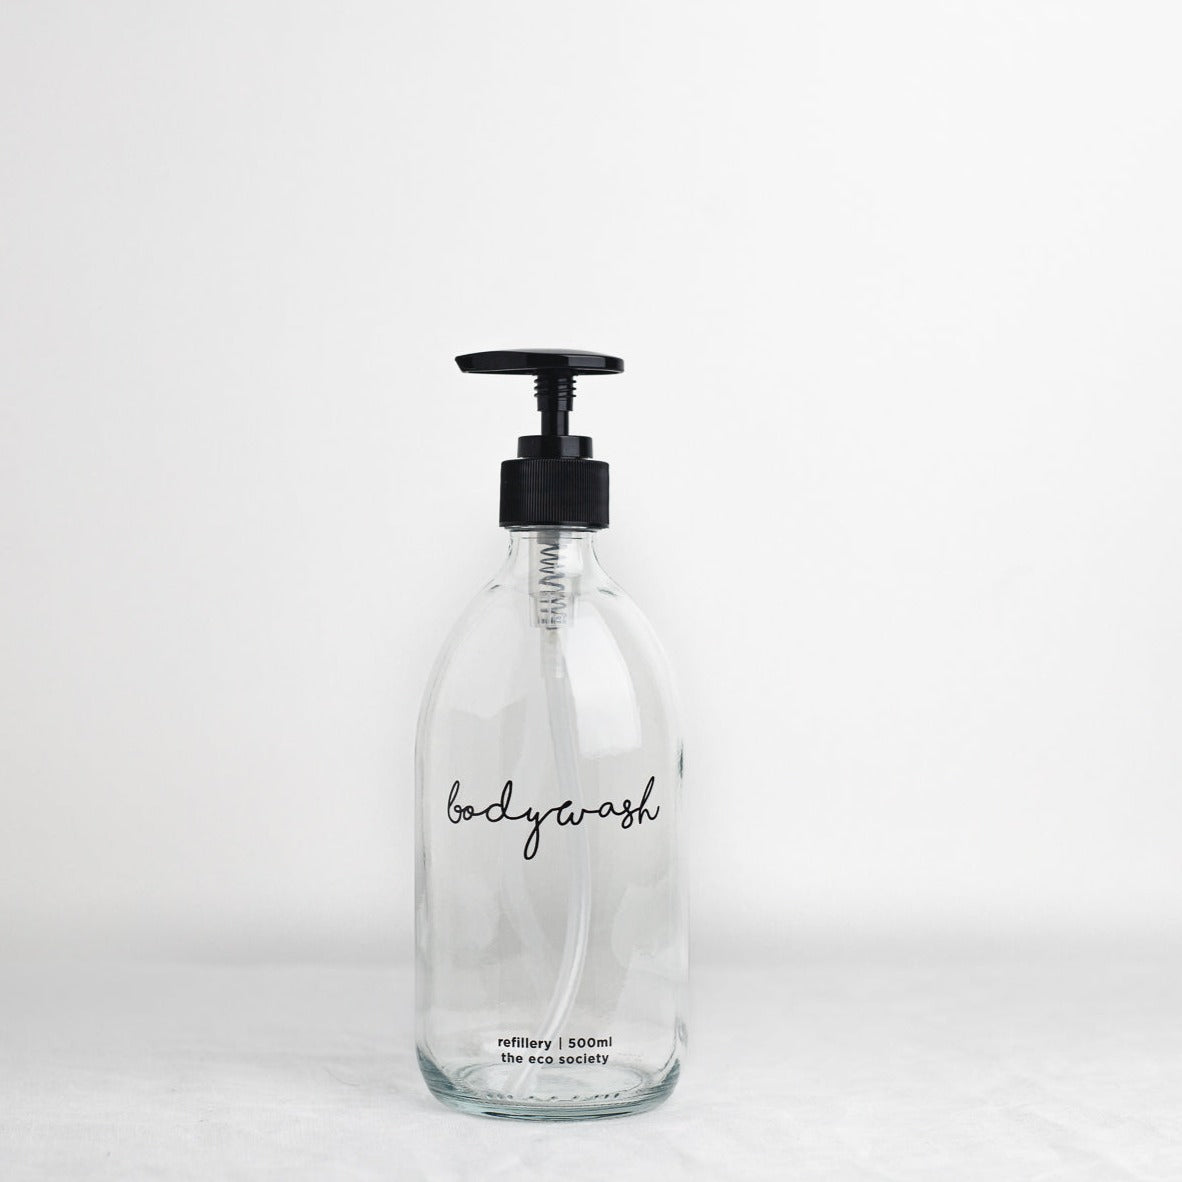 Clear Glass Bottle with Black printed text "Bodywash" 500ml Refillery Bottle